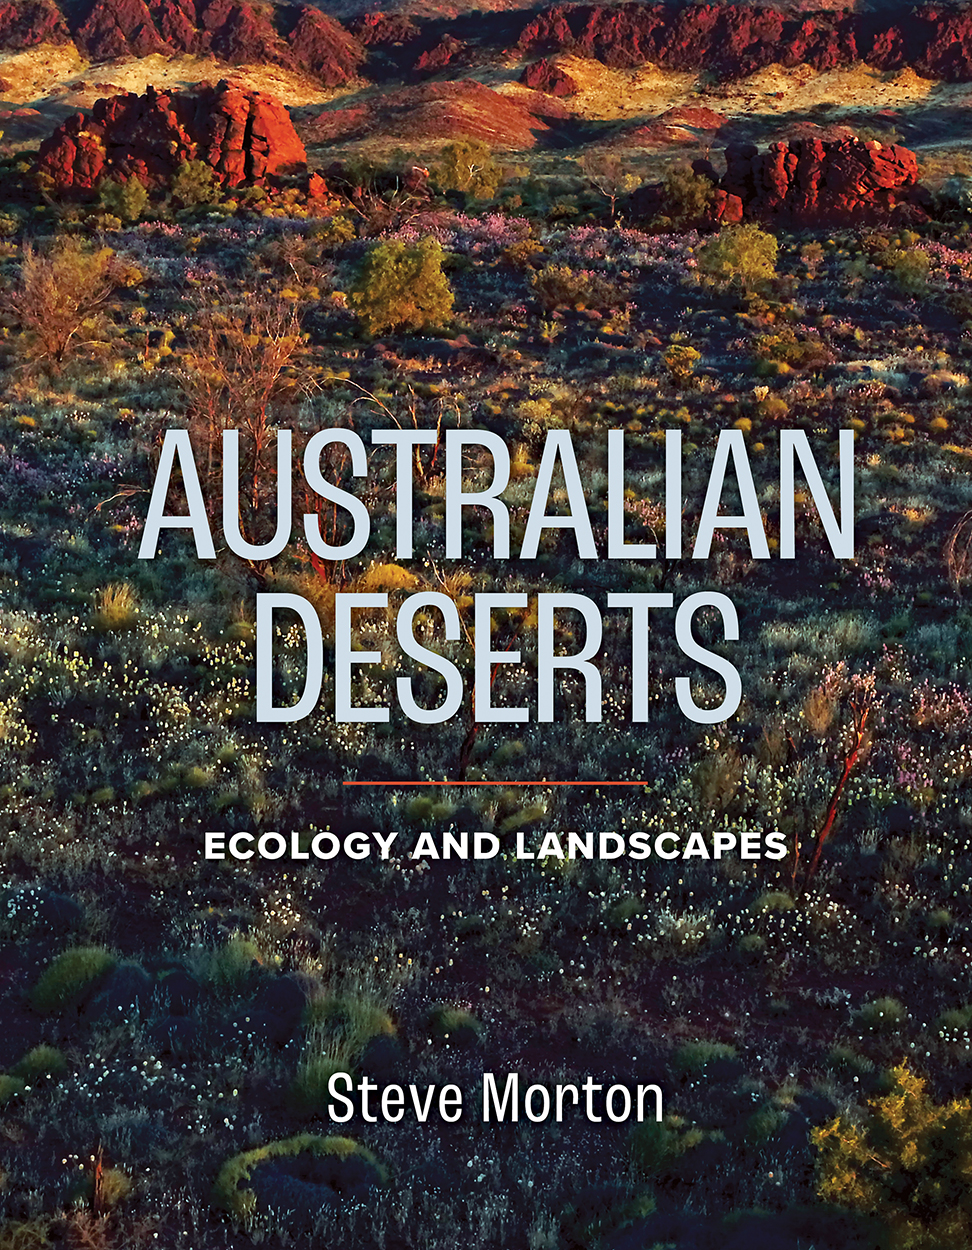 Cover of 'Australian Deserts: Ecology and Landscapes', featuring a photo of a desert landscape with various plants in the foreground transitioning to